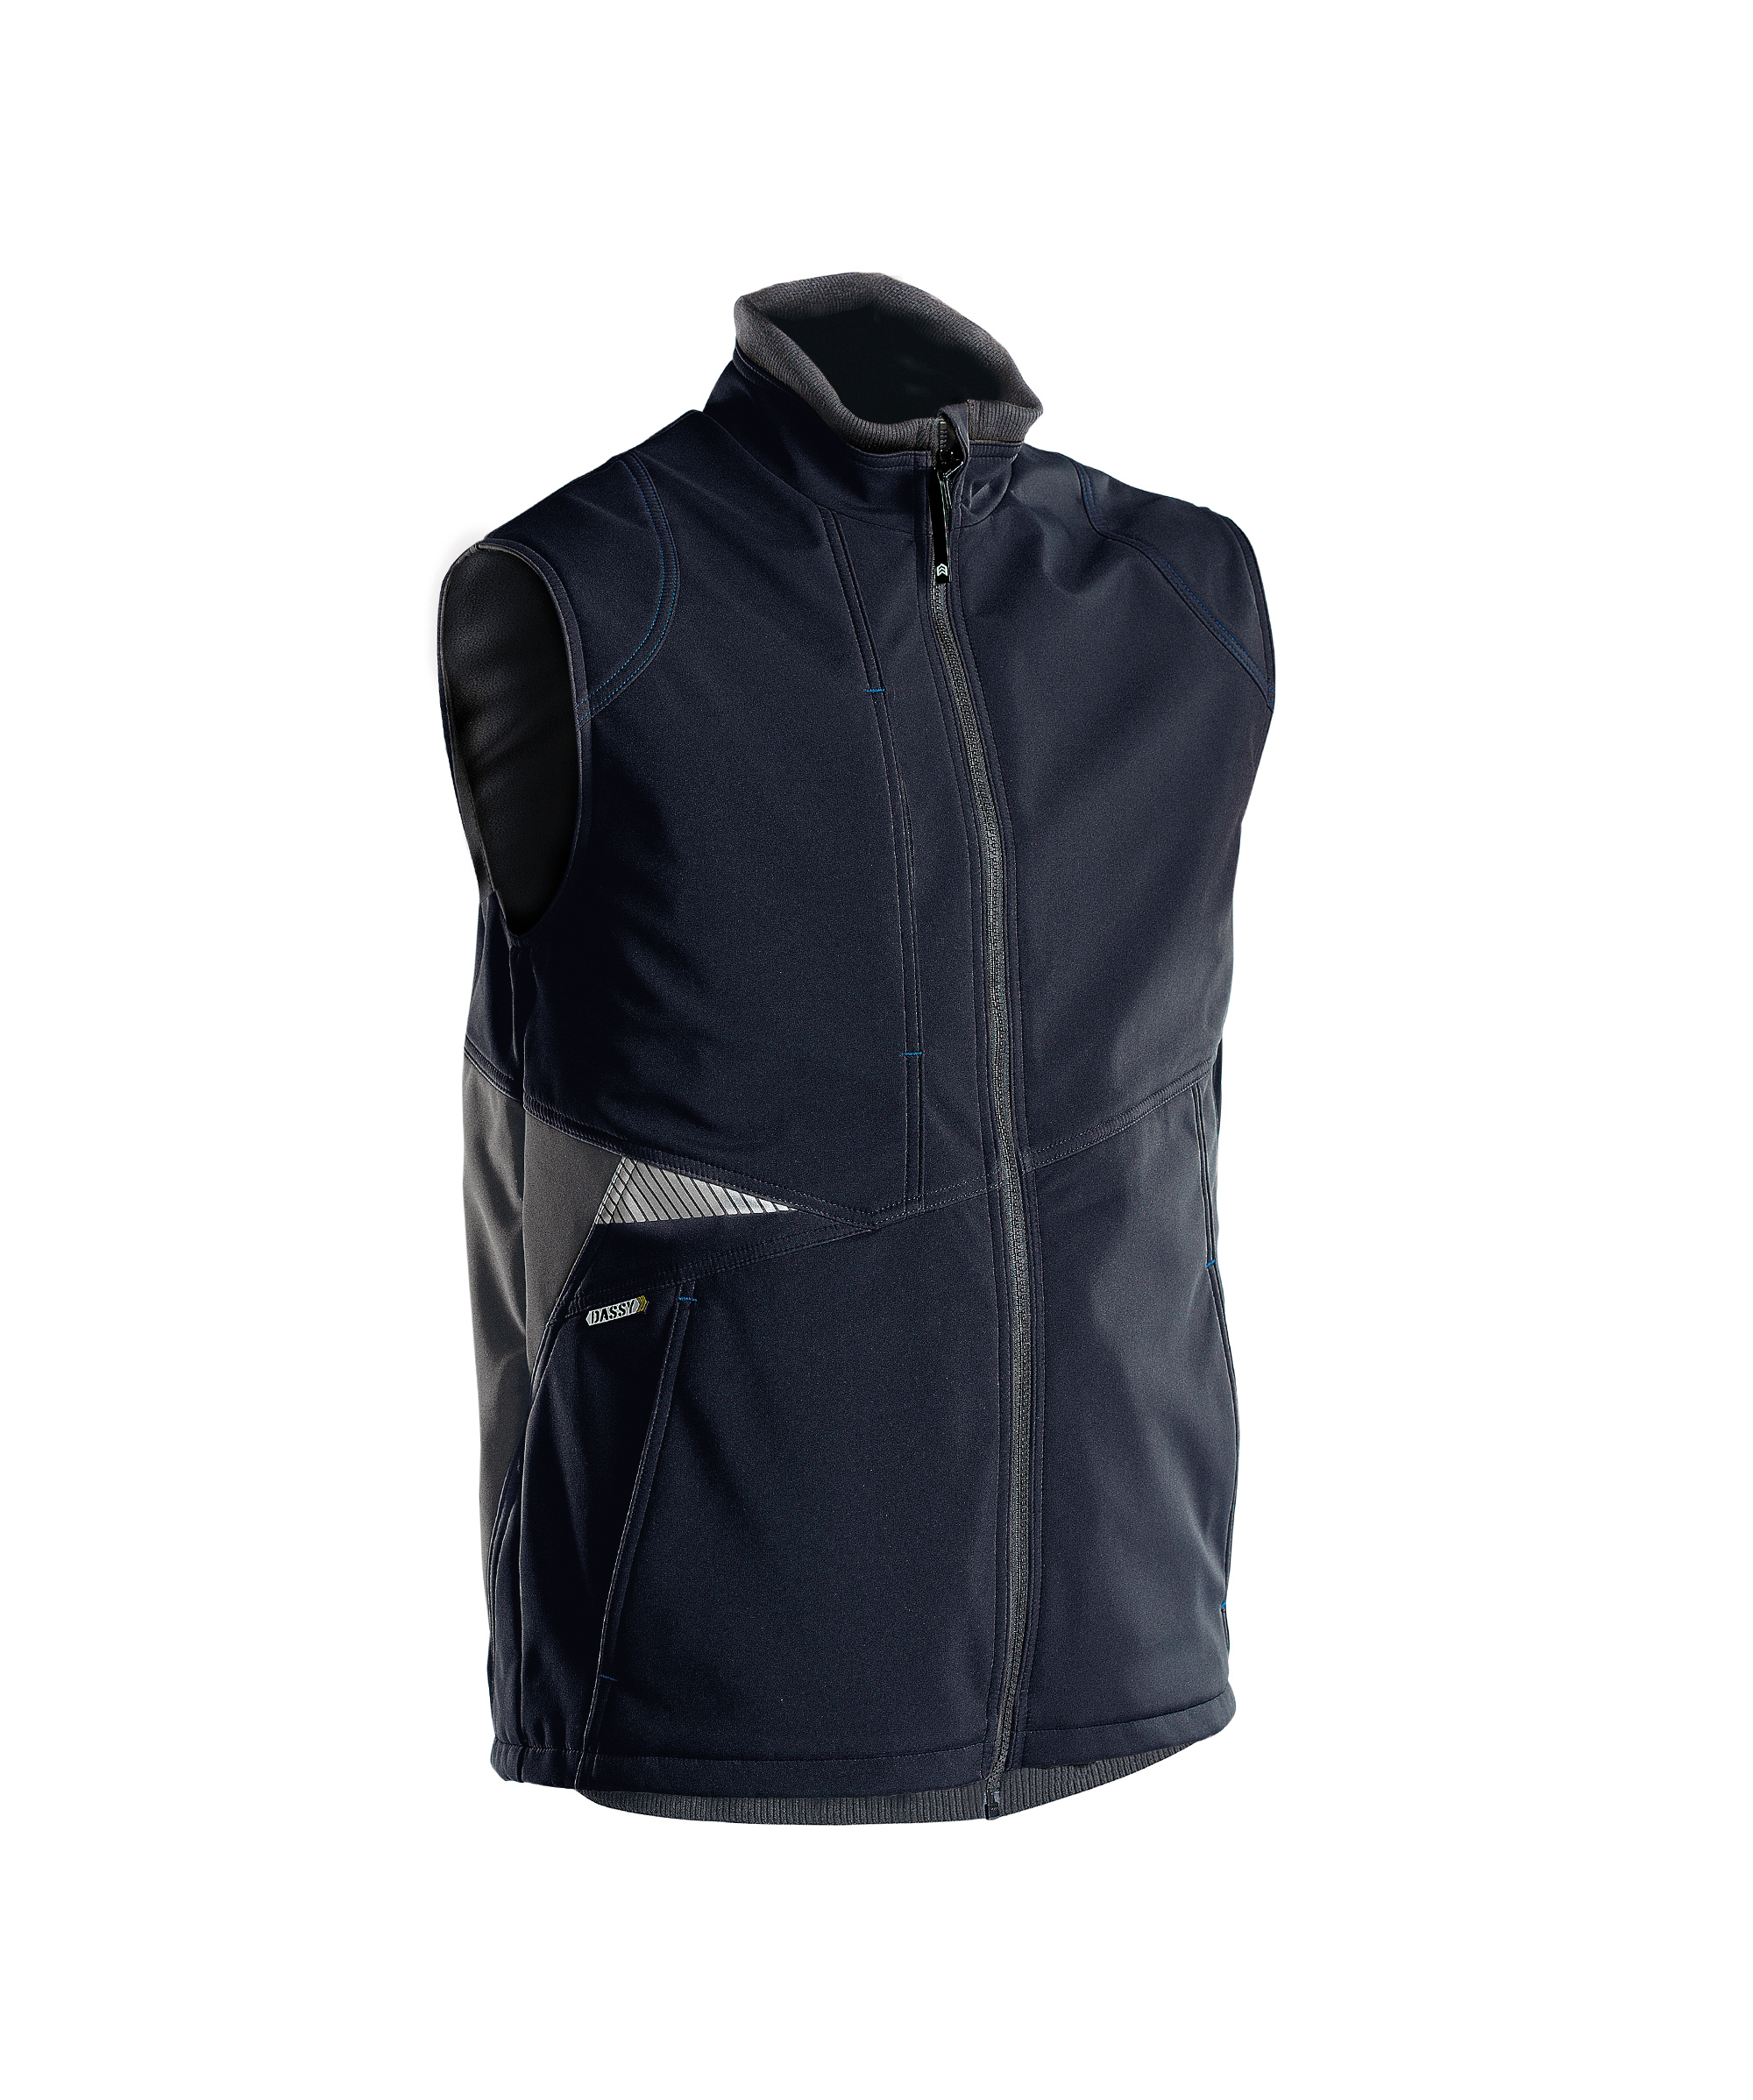 fusion_two-tone-softshell-body-warmer_midnight-blue-anthracite-grey_front.jpg